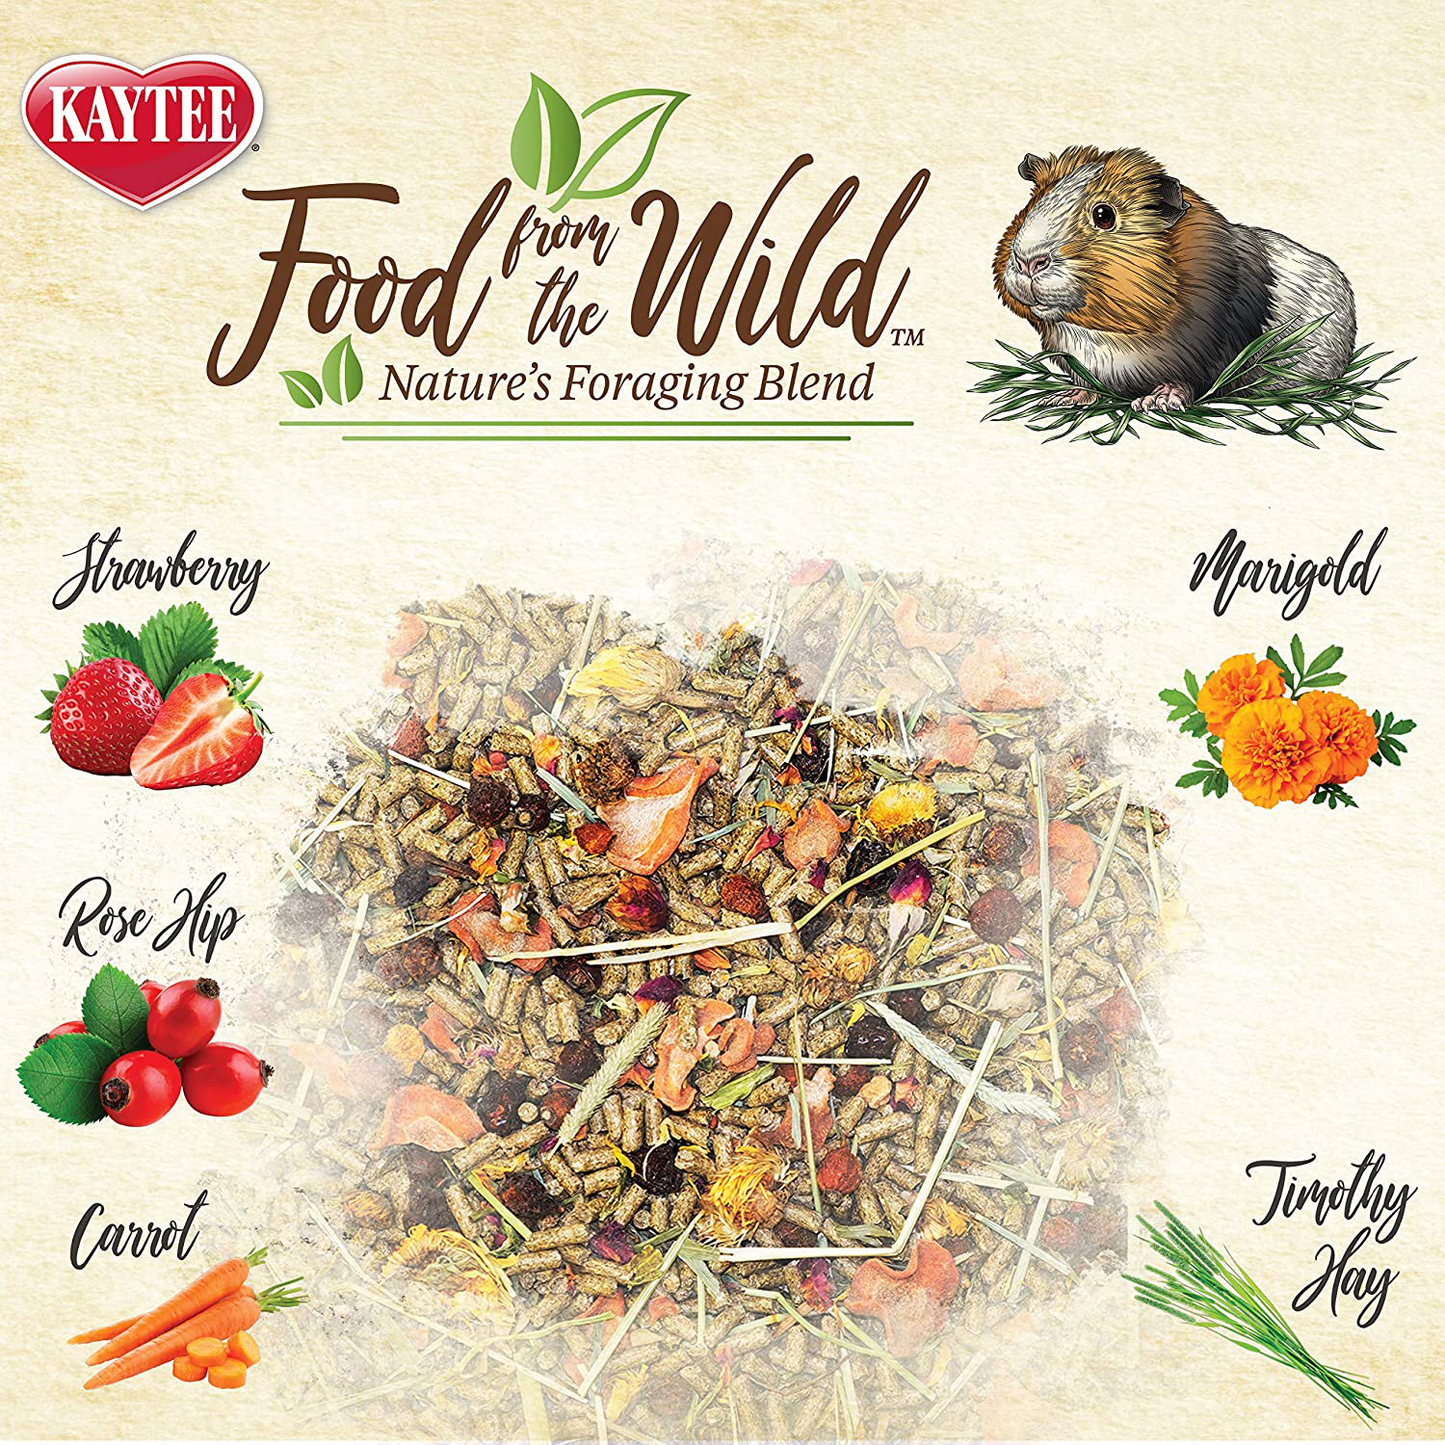 Kaytee Food from the Wild Guinea Pig,4 Lb